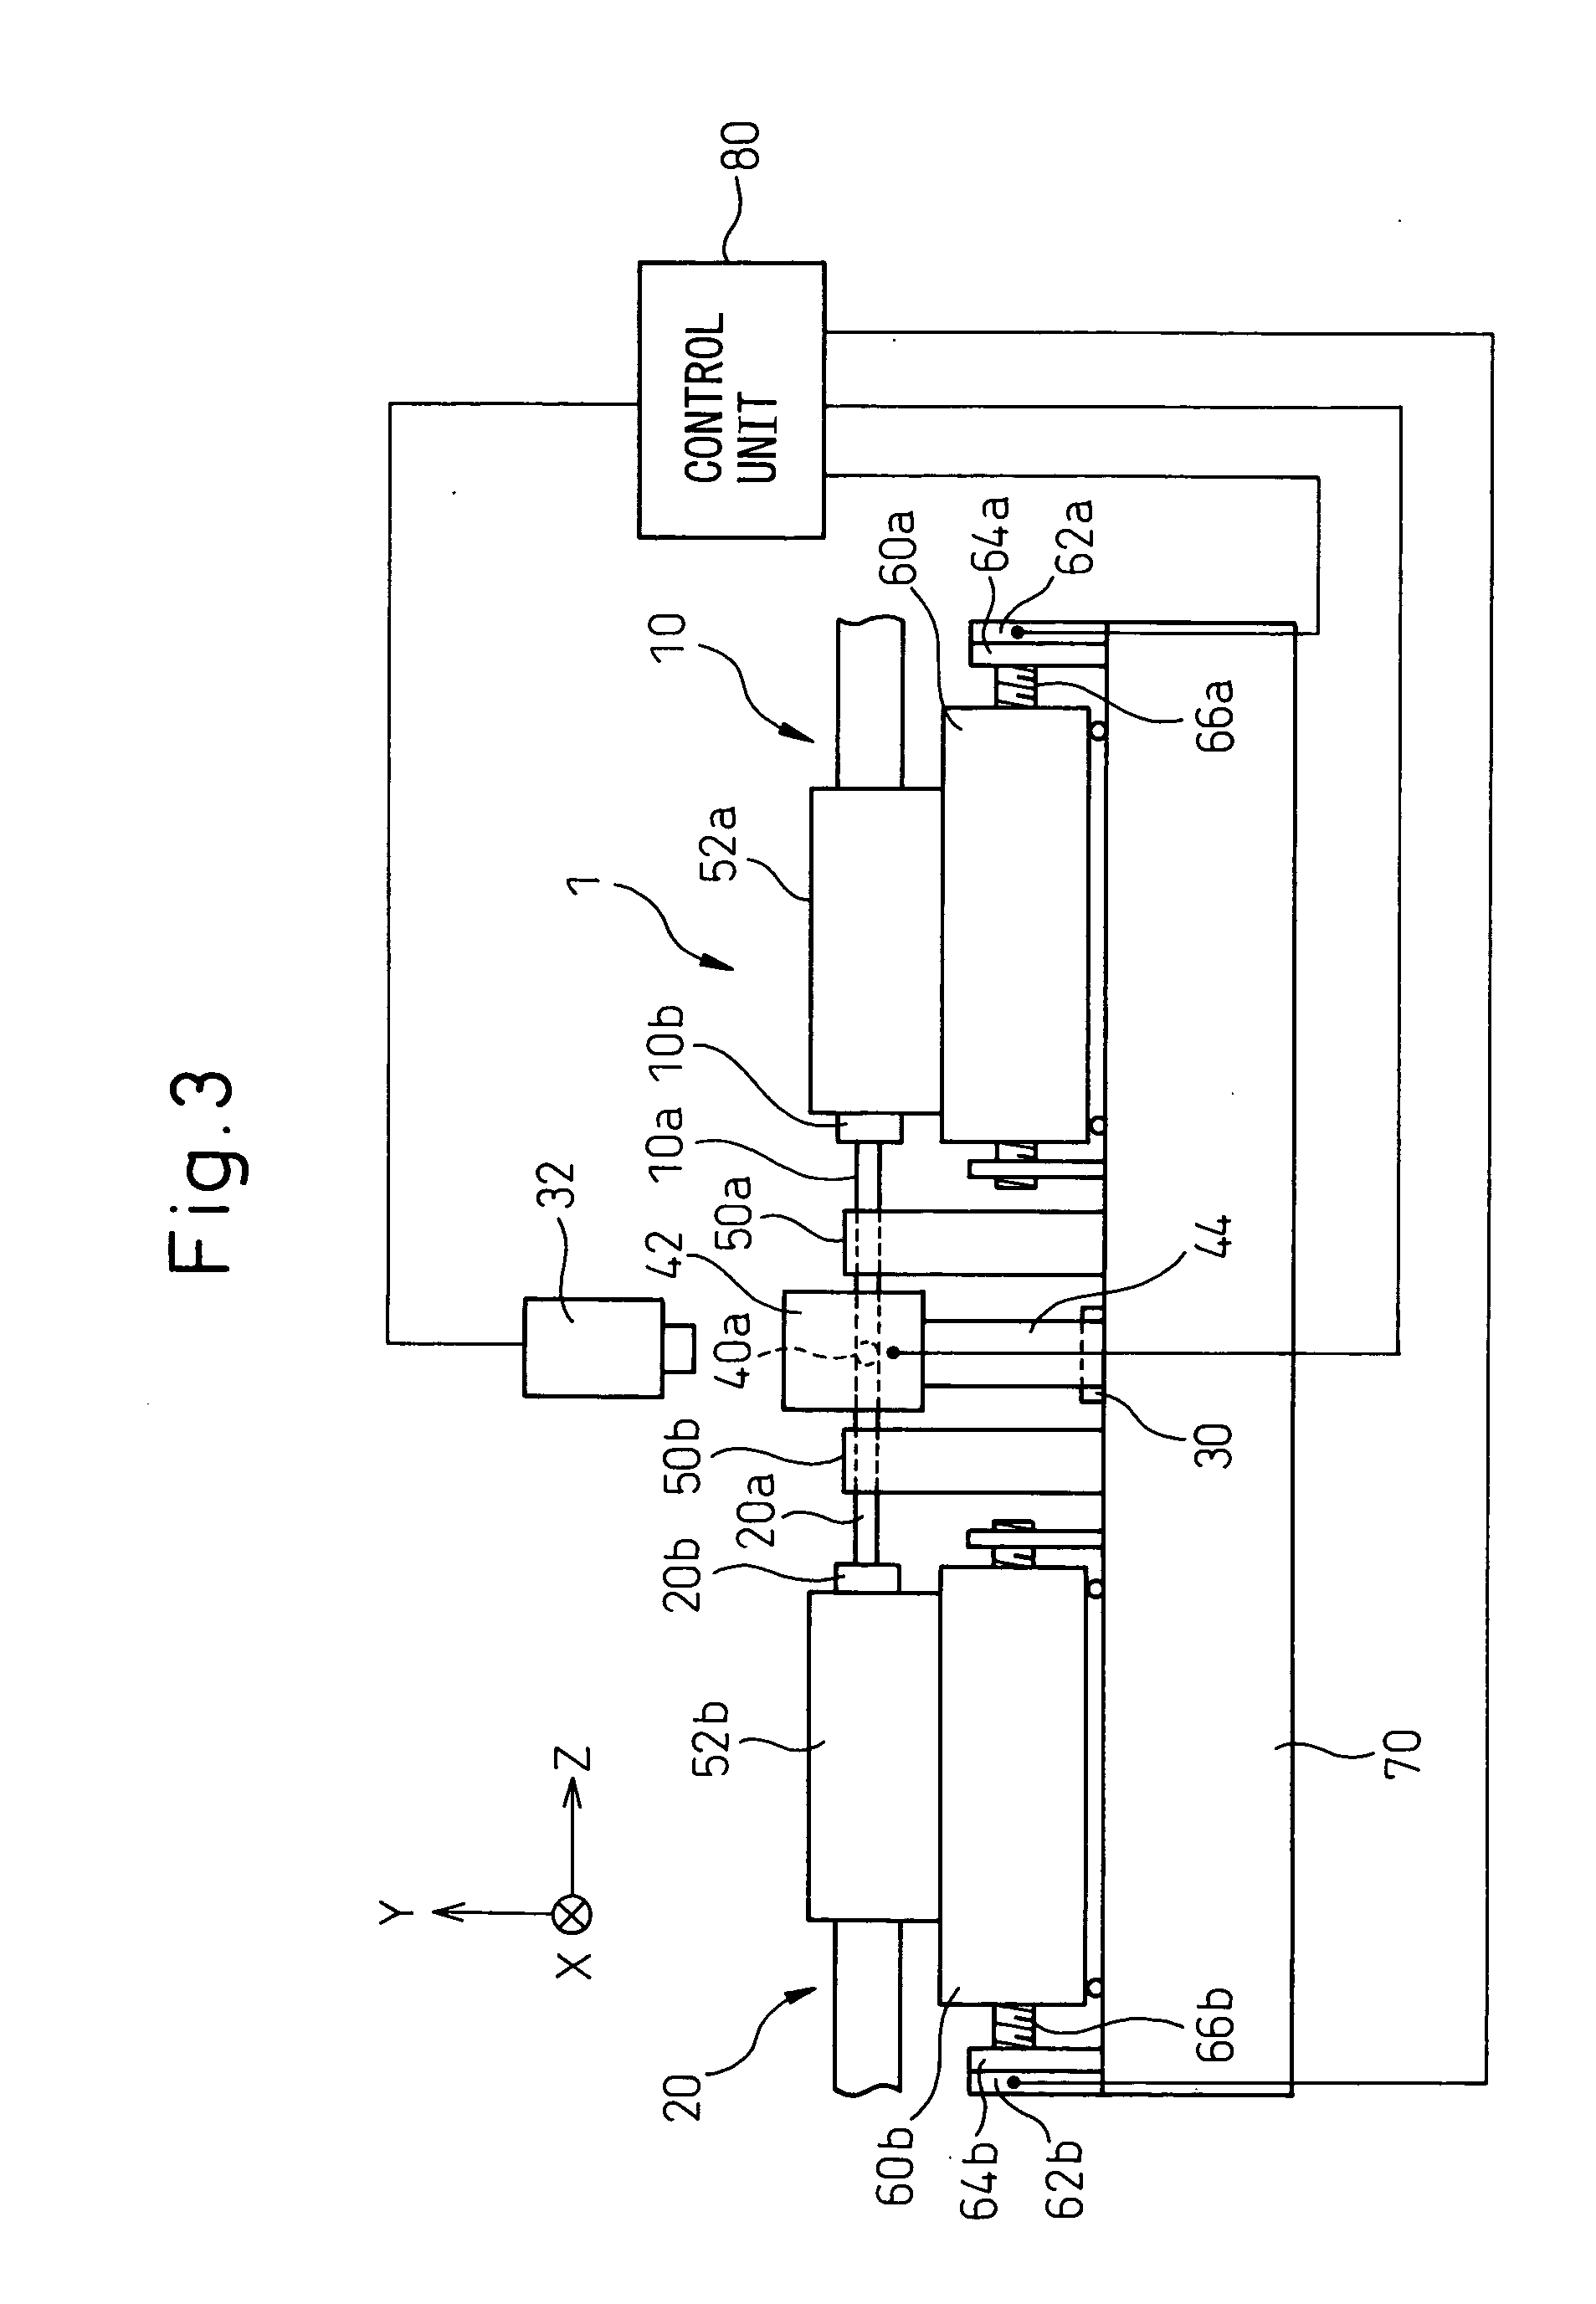 Method and apparatus for processing edge surfaces of optical fibers, and method and apparatus for fusion splicing optical fibers